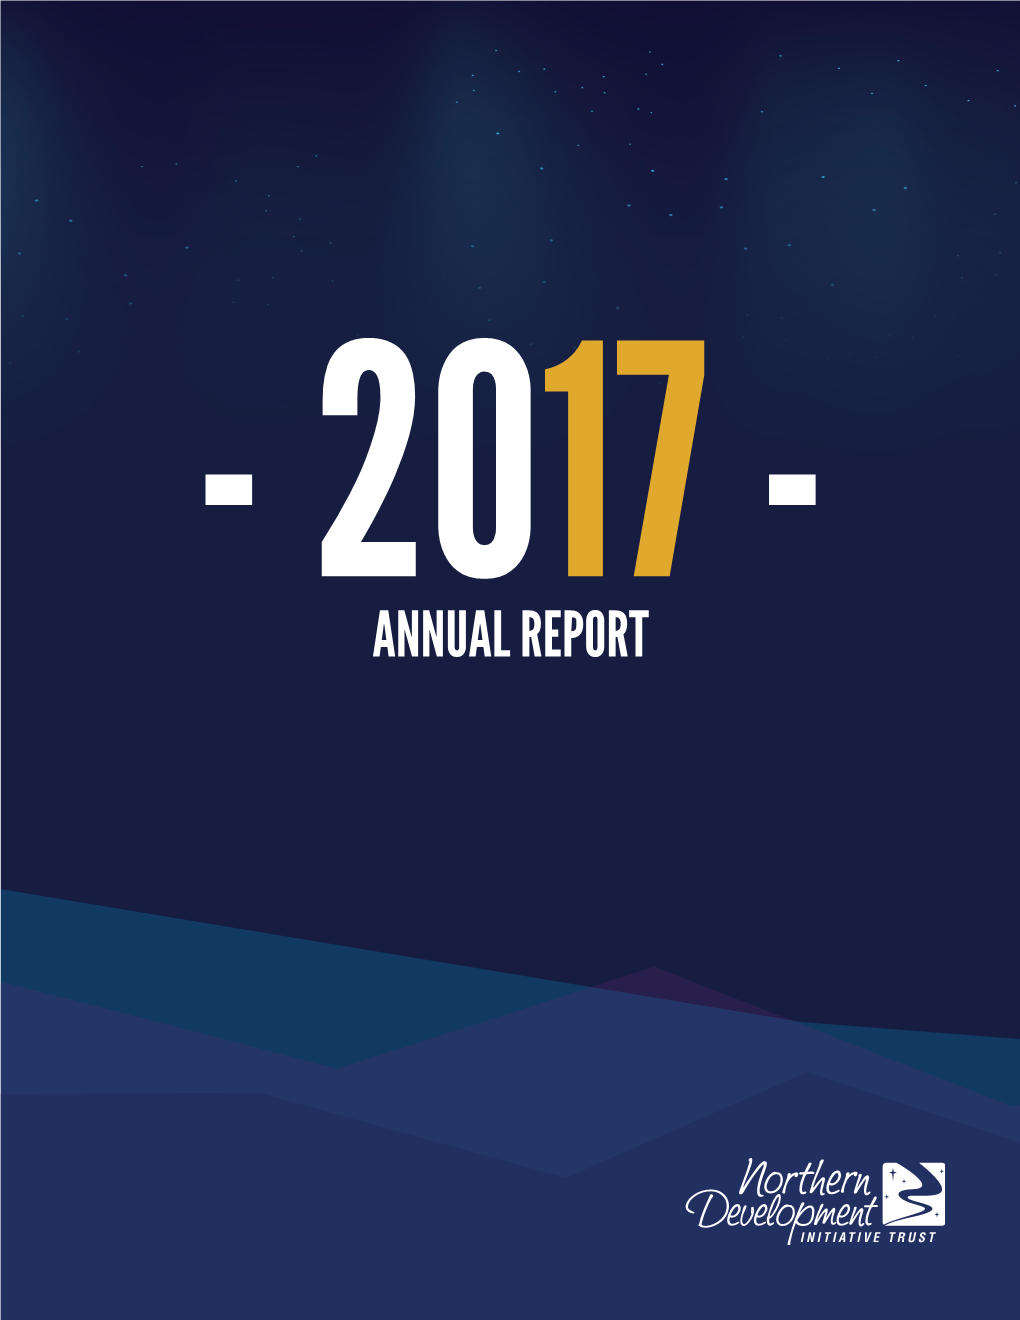 2017 Annual Report to Focus on the $185 Million to Work Together Teamwork That Defines What ‘Building a Stronger North’ to Build a Stronger North